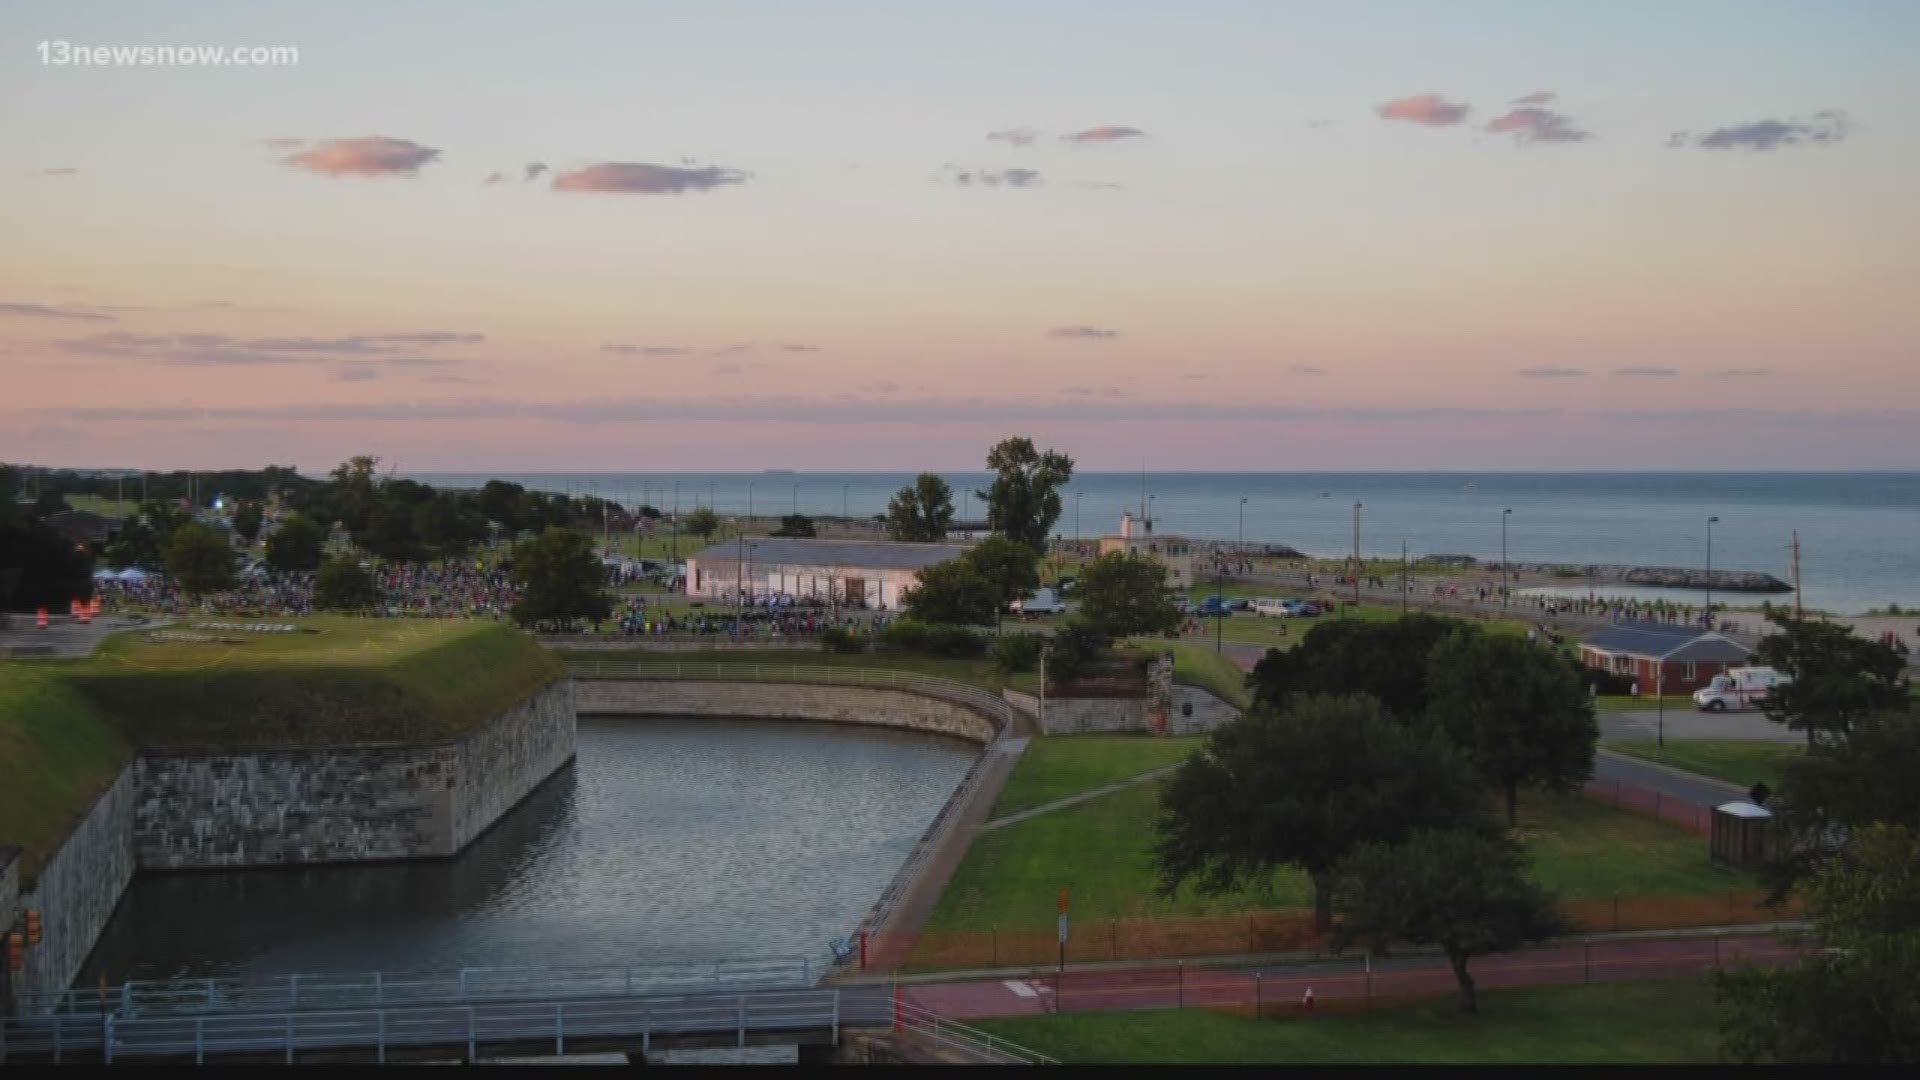 Celebrate Independence Day with a day of festivities at Fort Monroe.